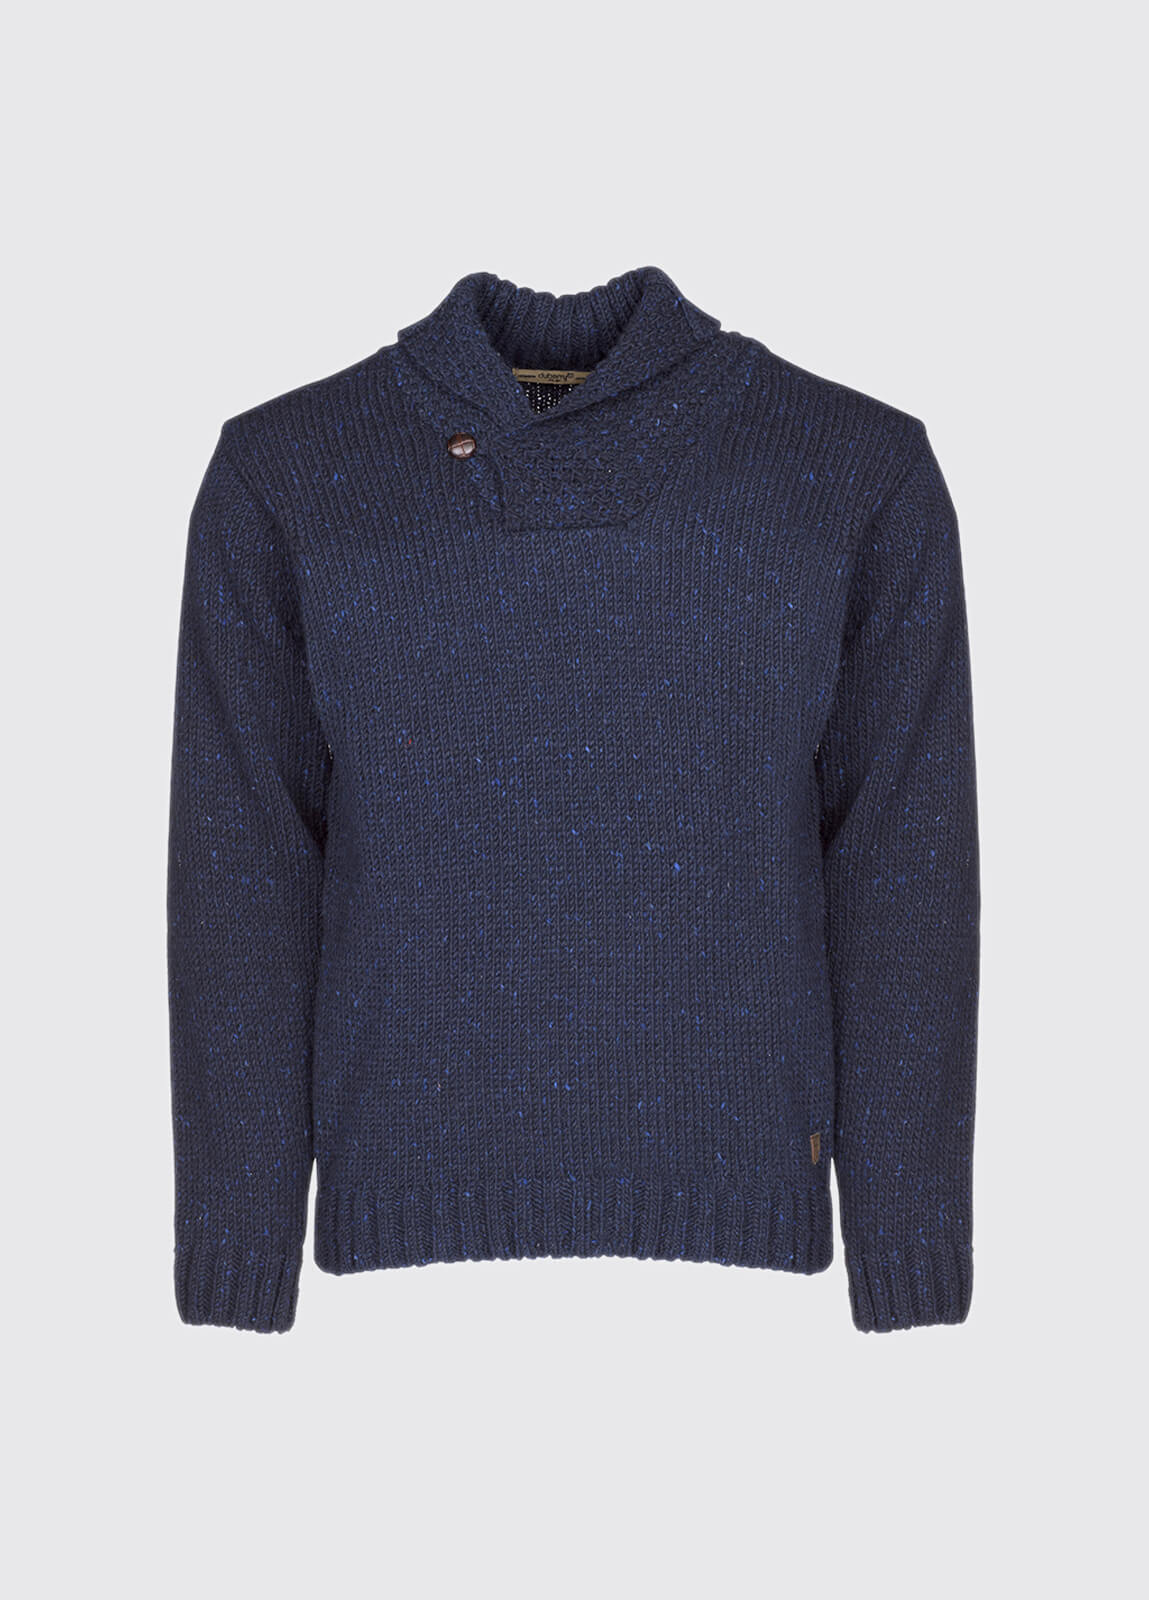 Moriarty sweater - Navy